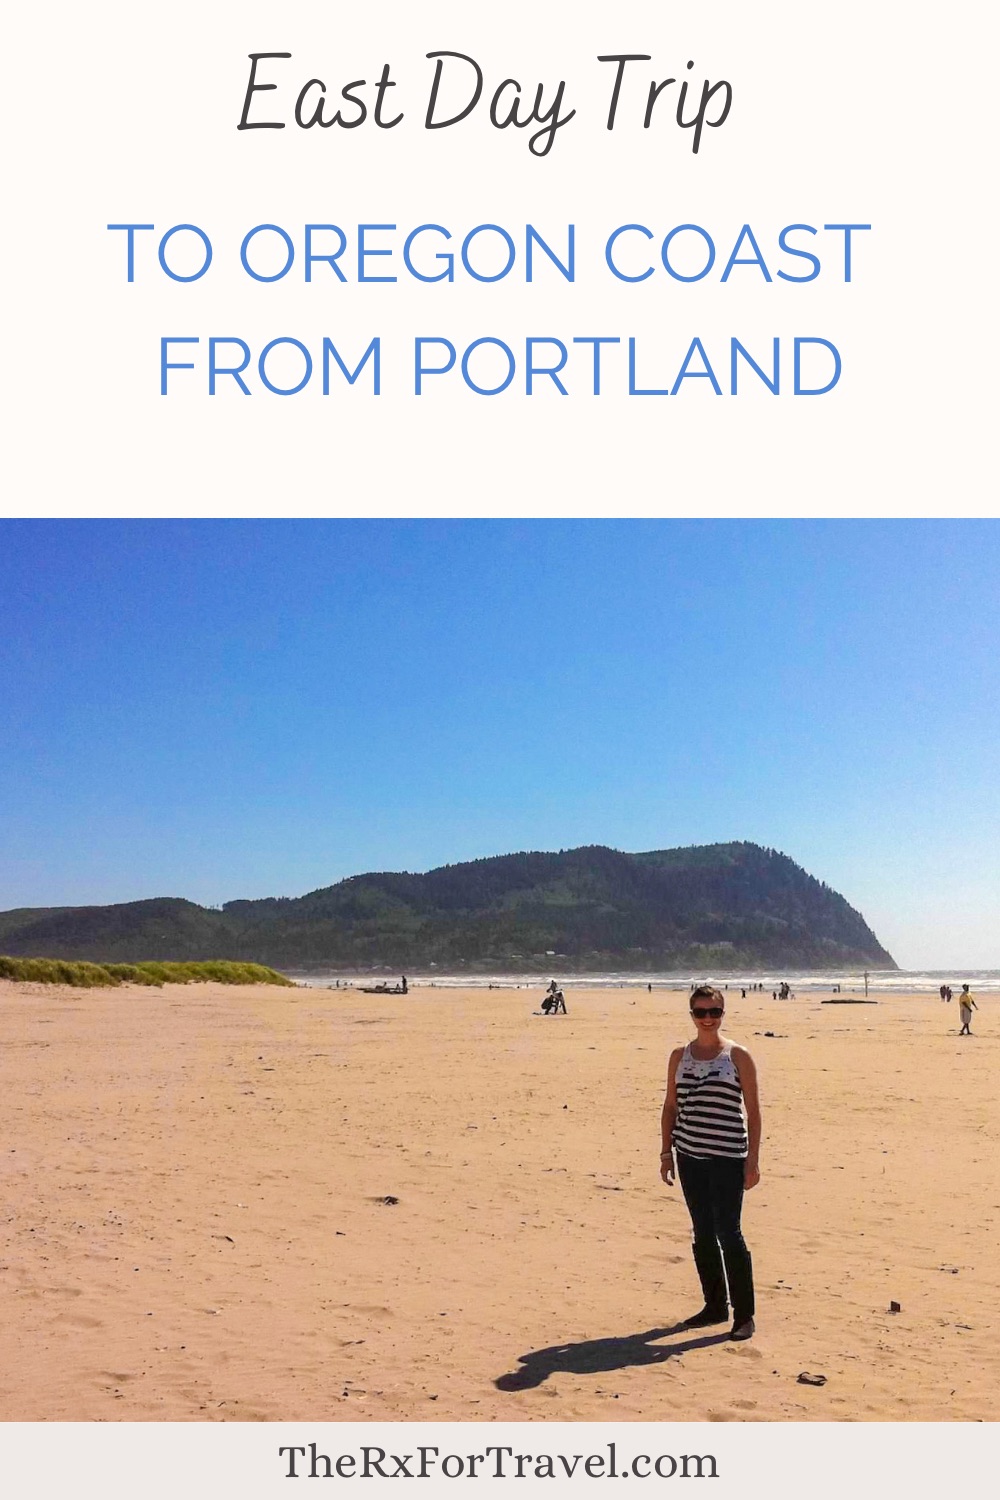 If you want an easy day trip from Portland to see the Oregon Coast, then this post has you covered.